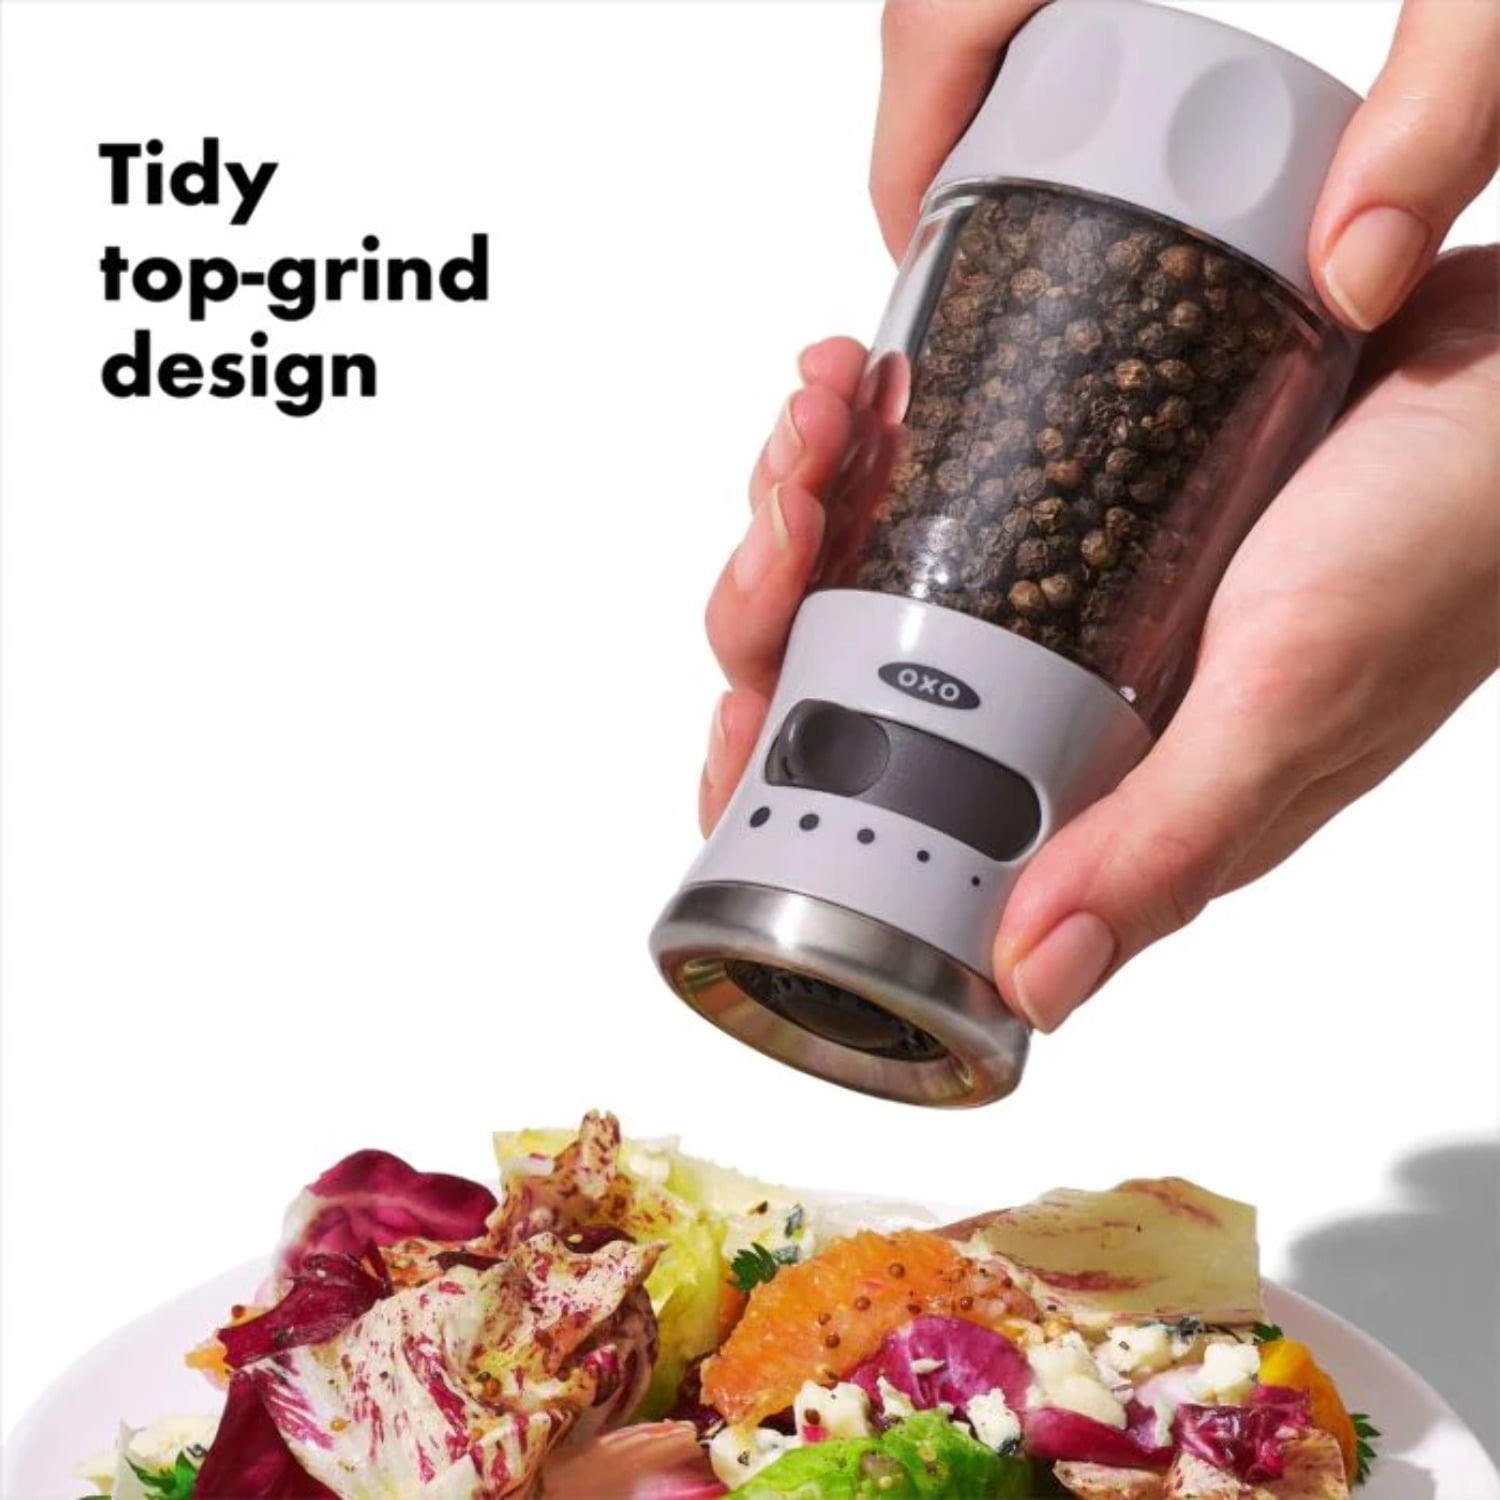  OXO Good Grips Mess-Free Pepper Grinder, Stainless Steel